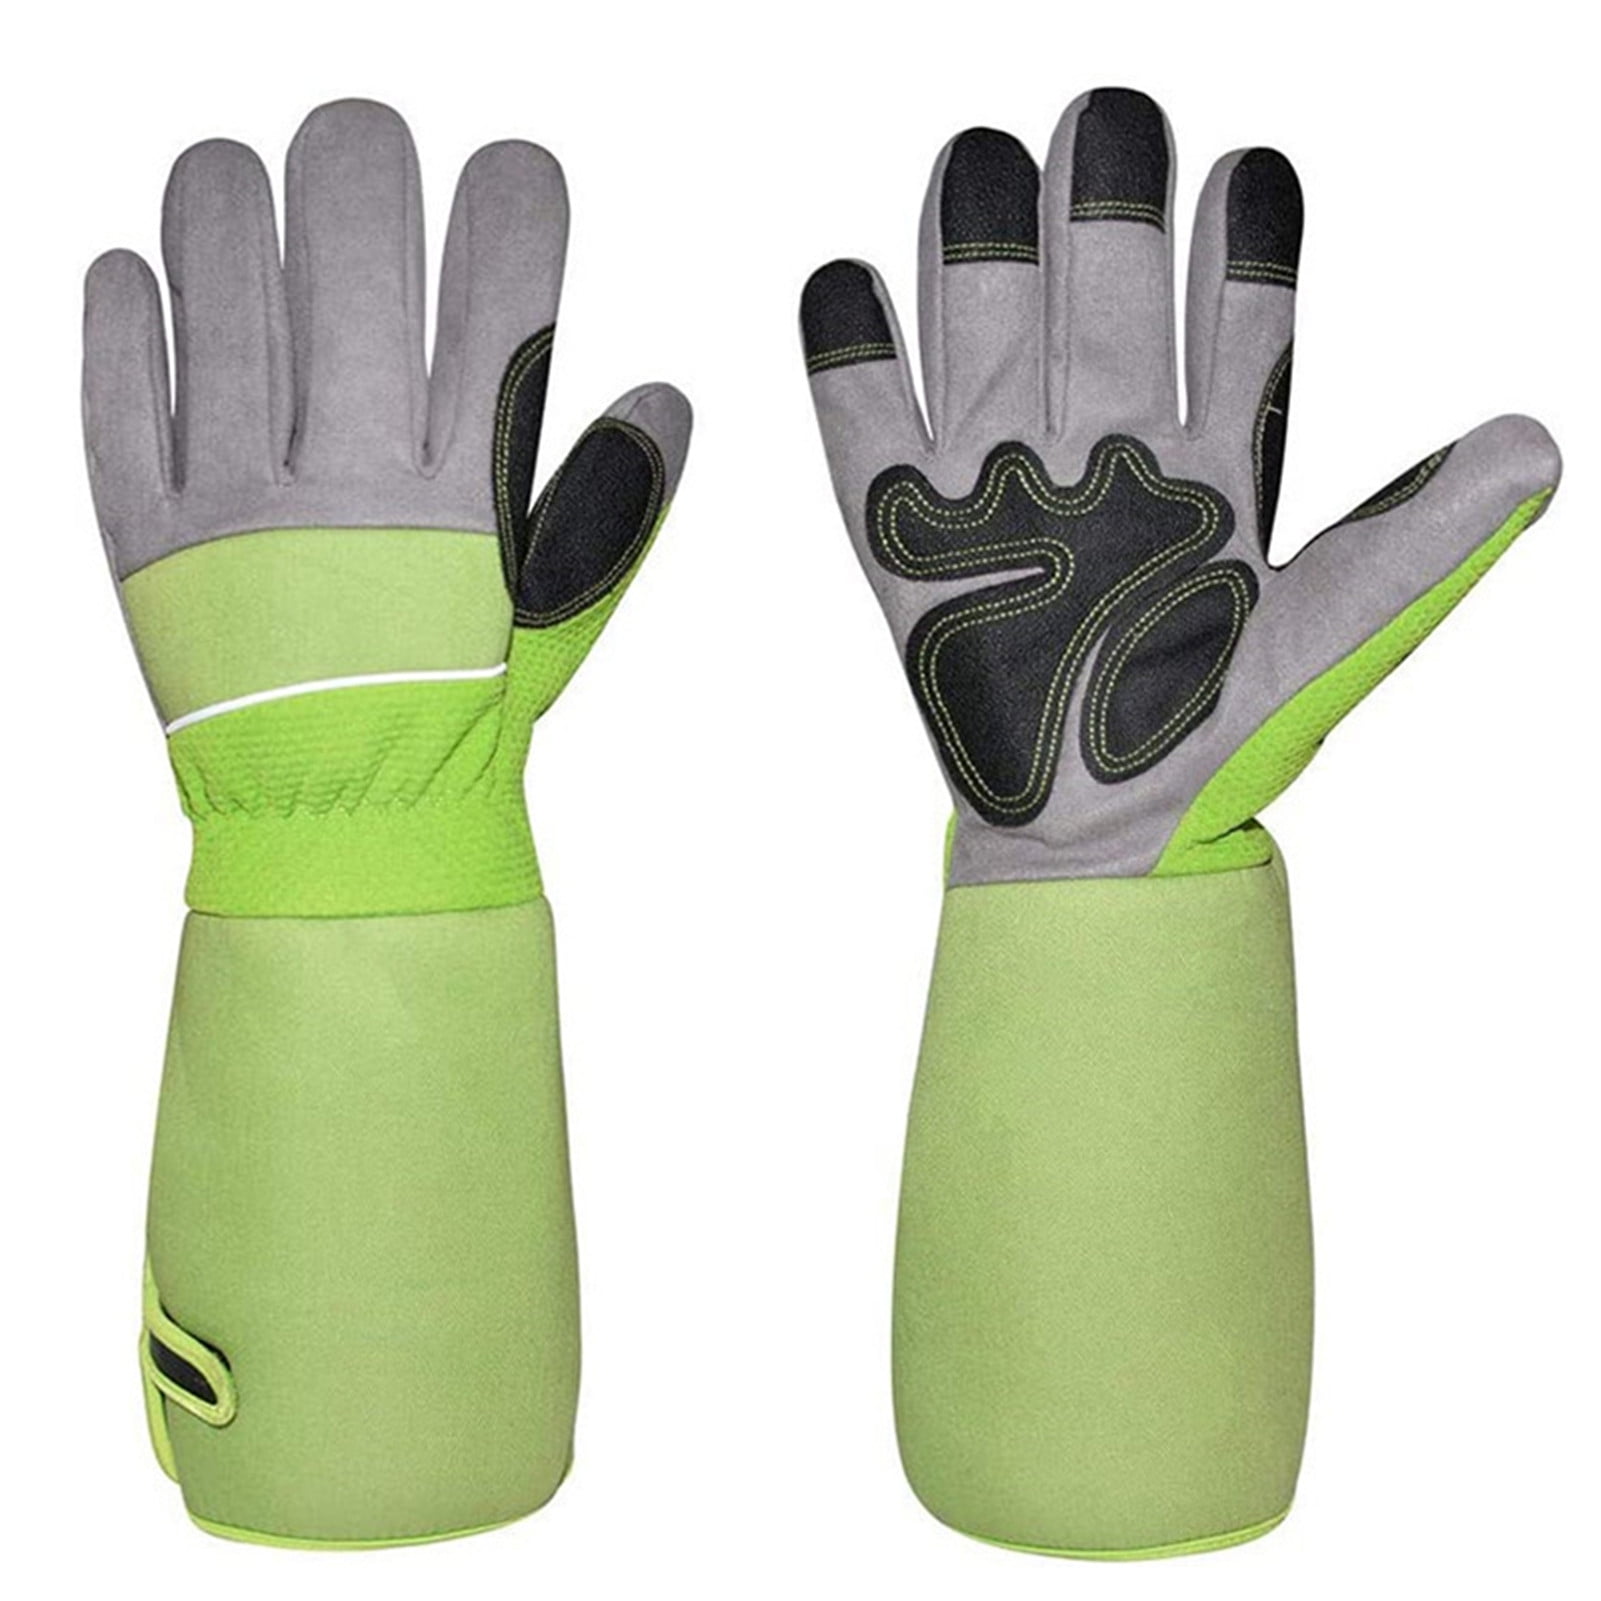 Perfect for Rose Gardening and Cacti Long Gardening Gloves|Thorn Proof 